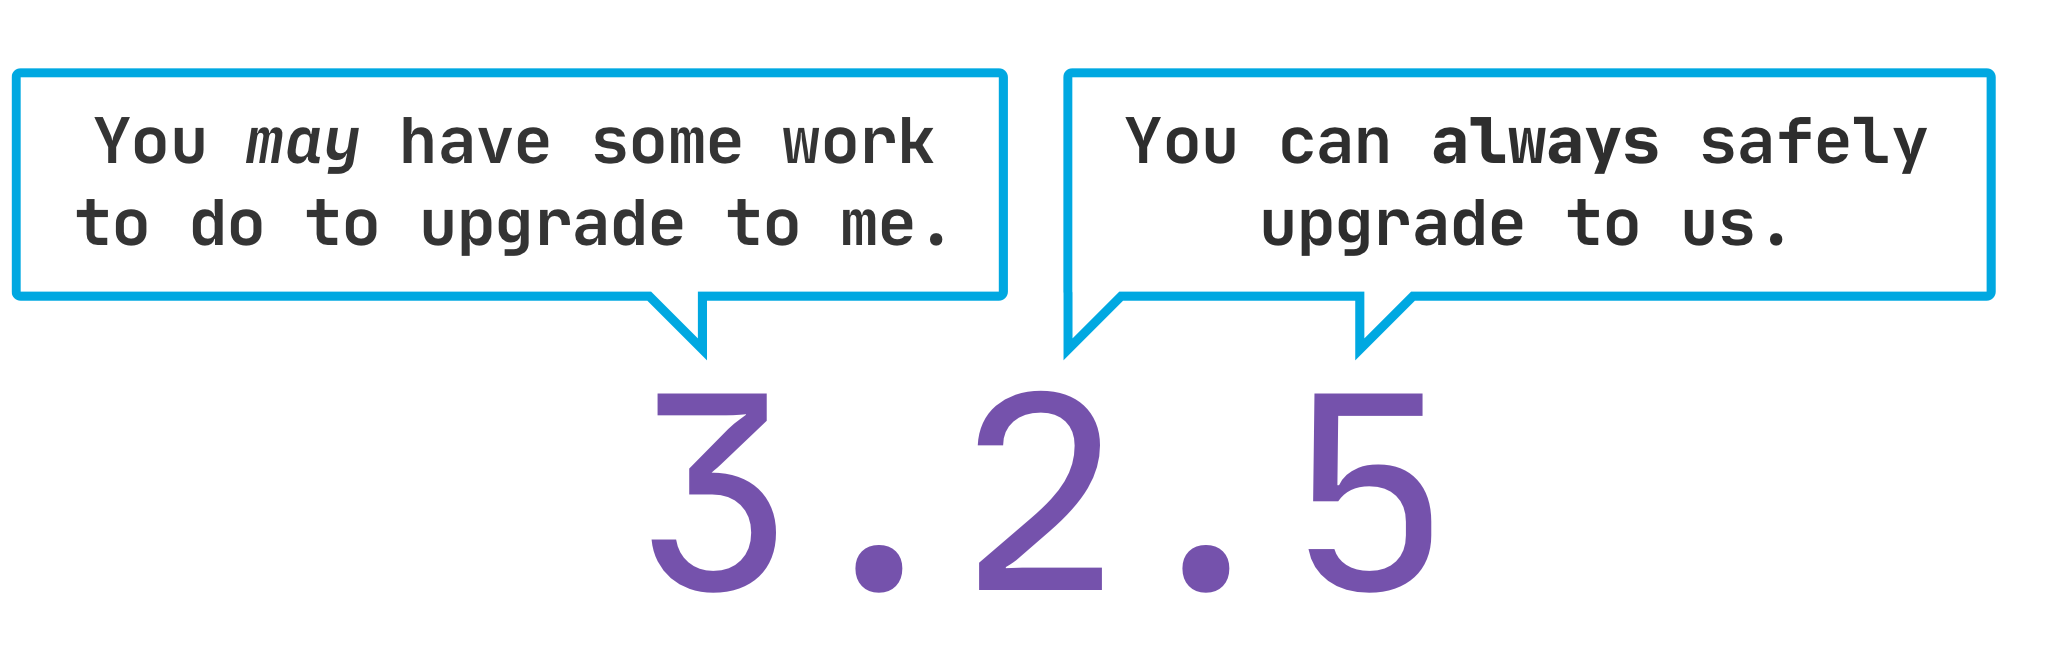 Illustration showing that patch and minor versions can be upgrade to safely, while major versions may require some work